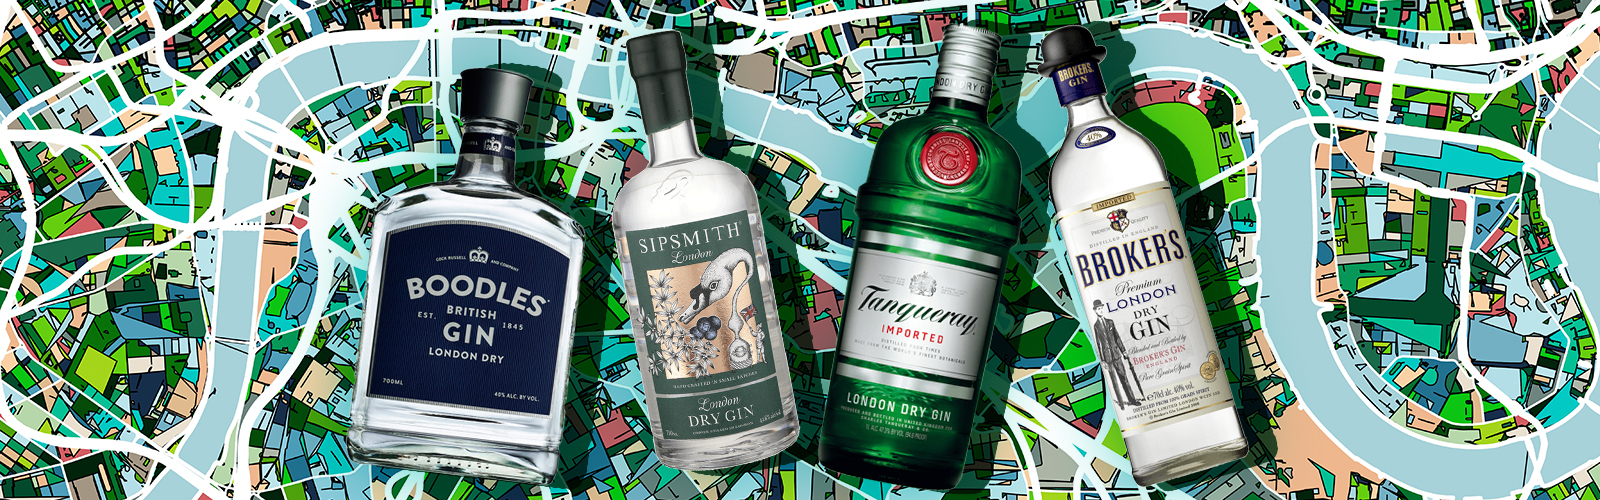 Boodles/Sipsmith/Tanqueray/Broker's/istock/Uproxx